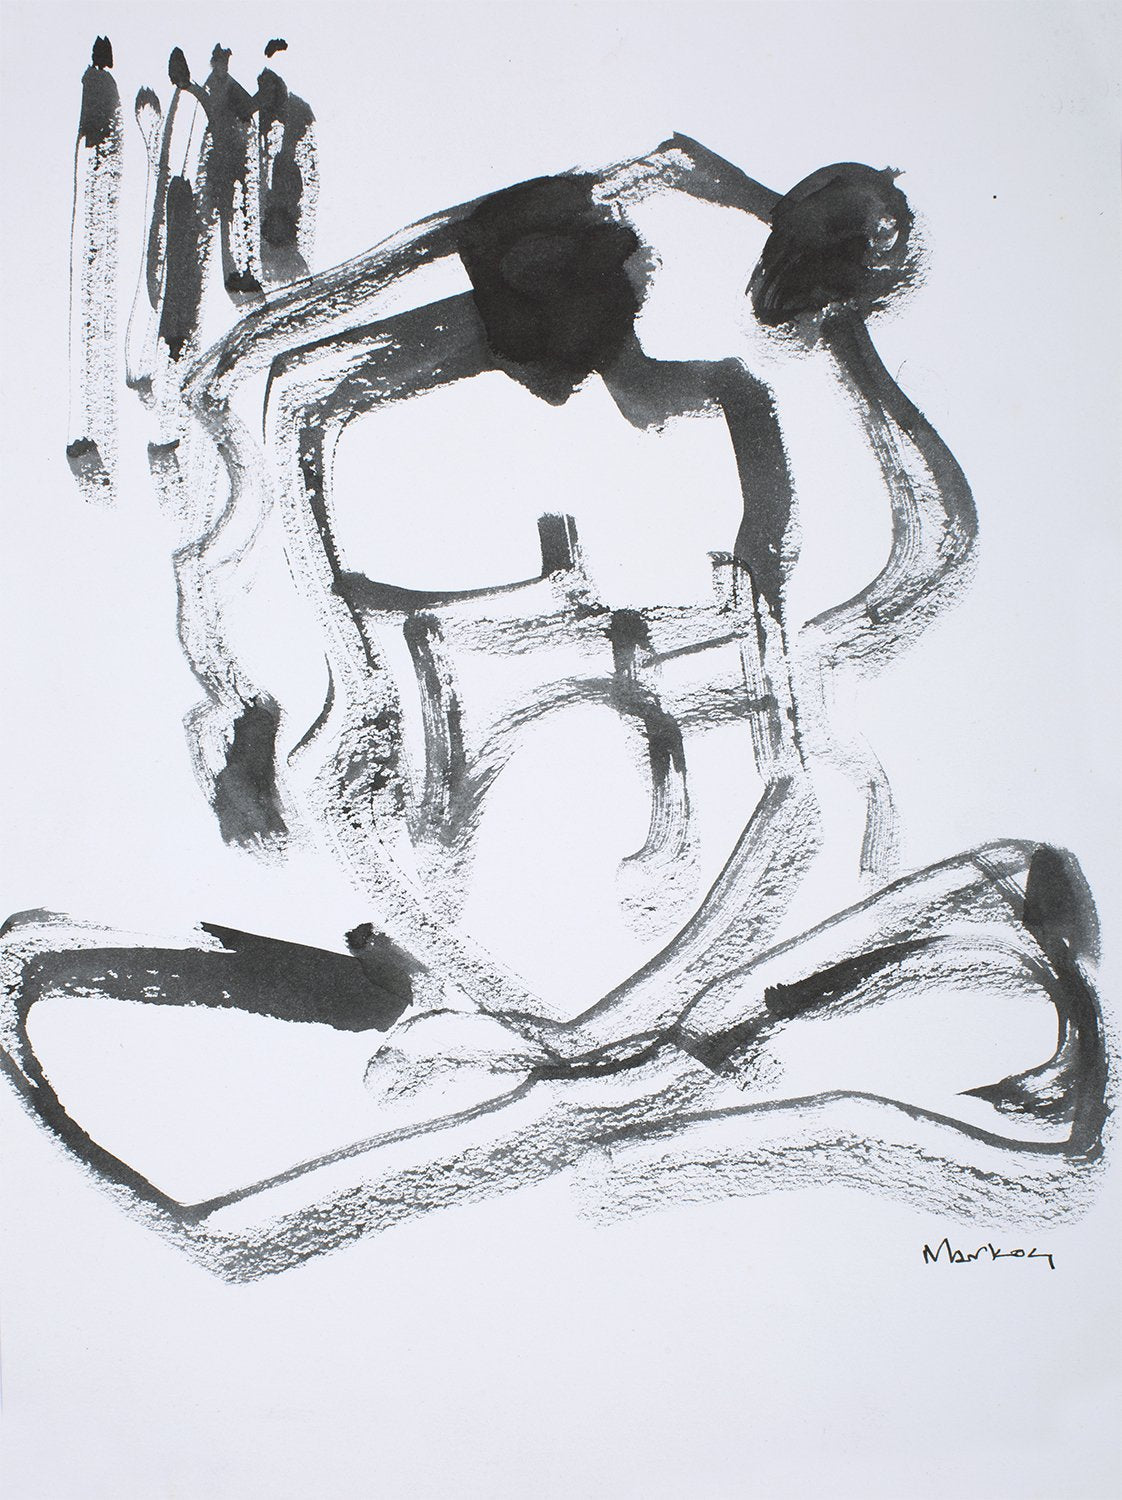 Nude 32|S. Mark Rathinaraj- Pen and Ink on Paper, , 13.5 x 10 inches